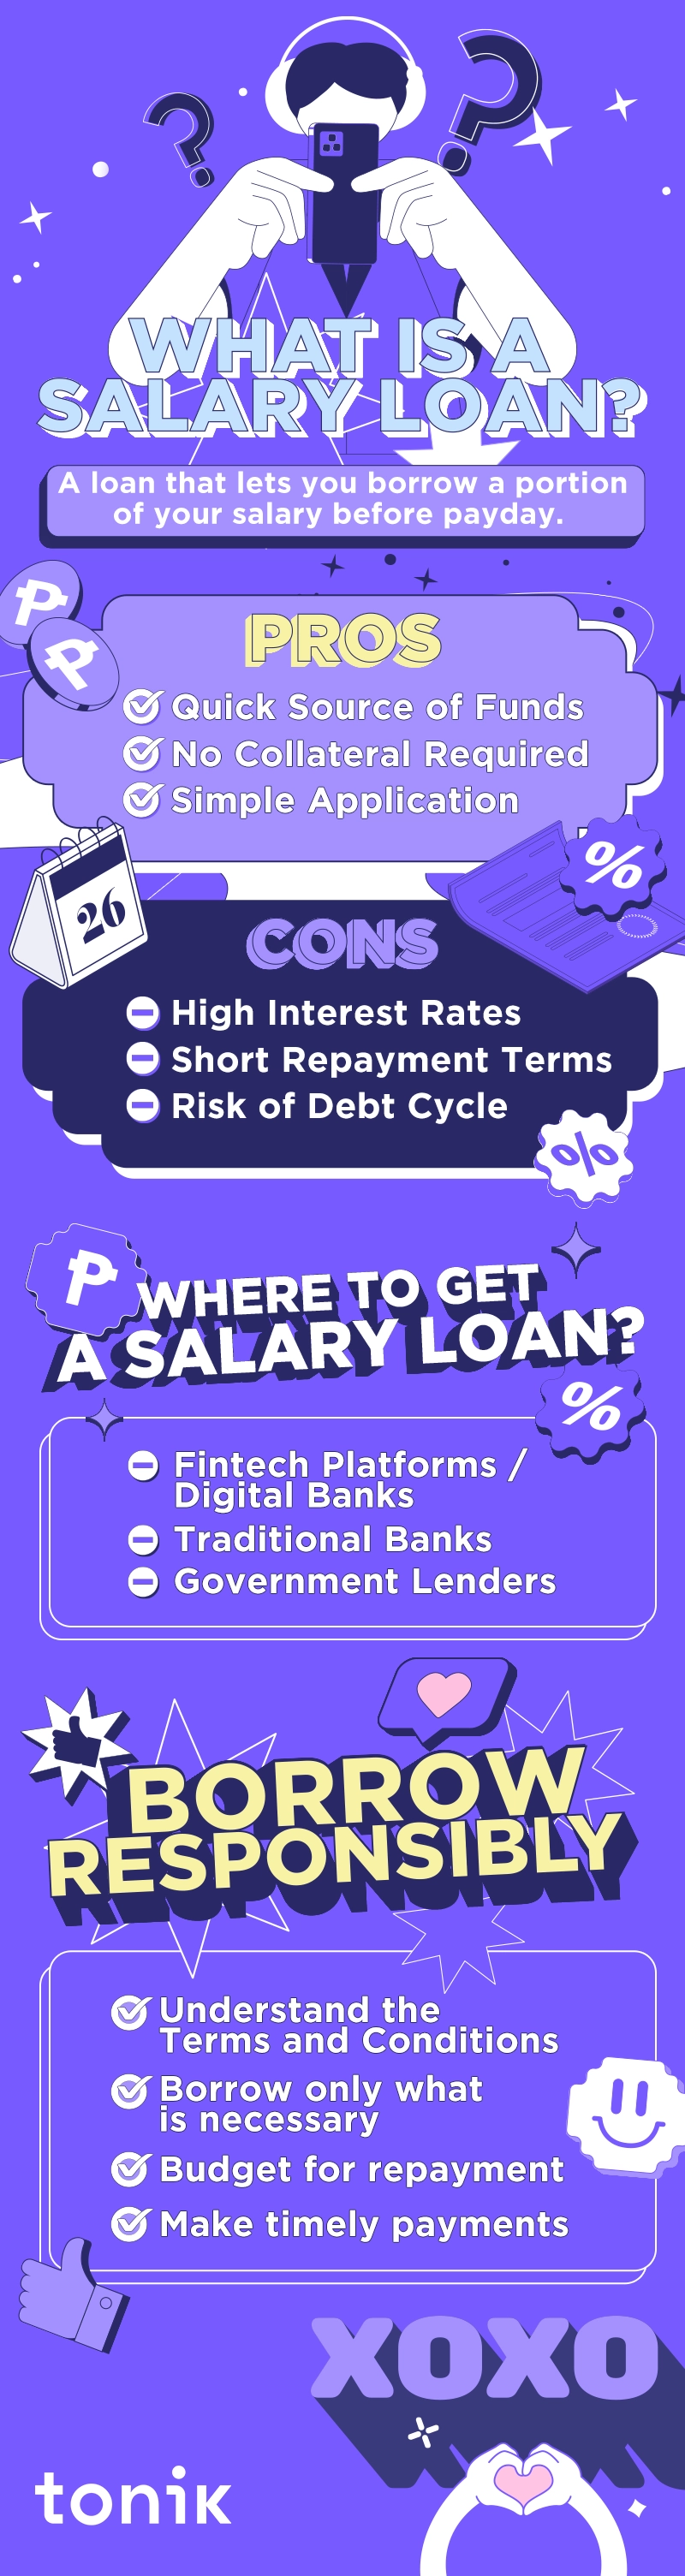 infographic on pros and cons for salary loan